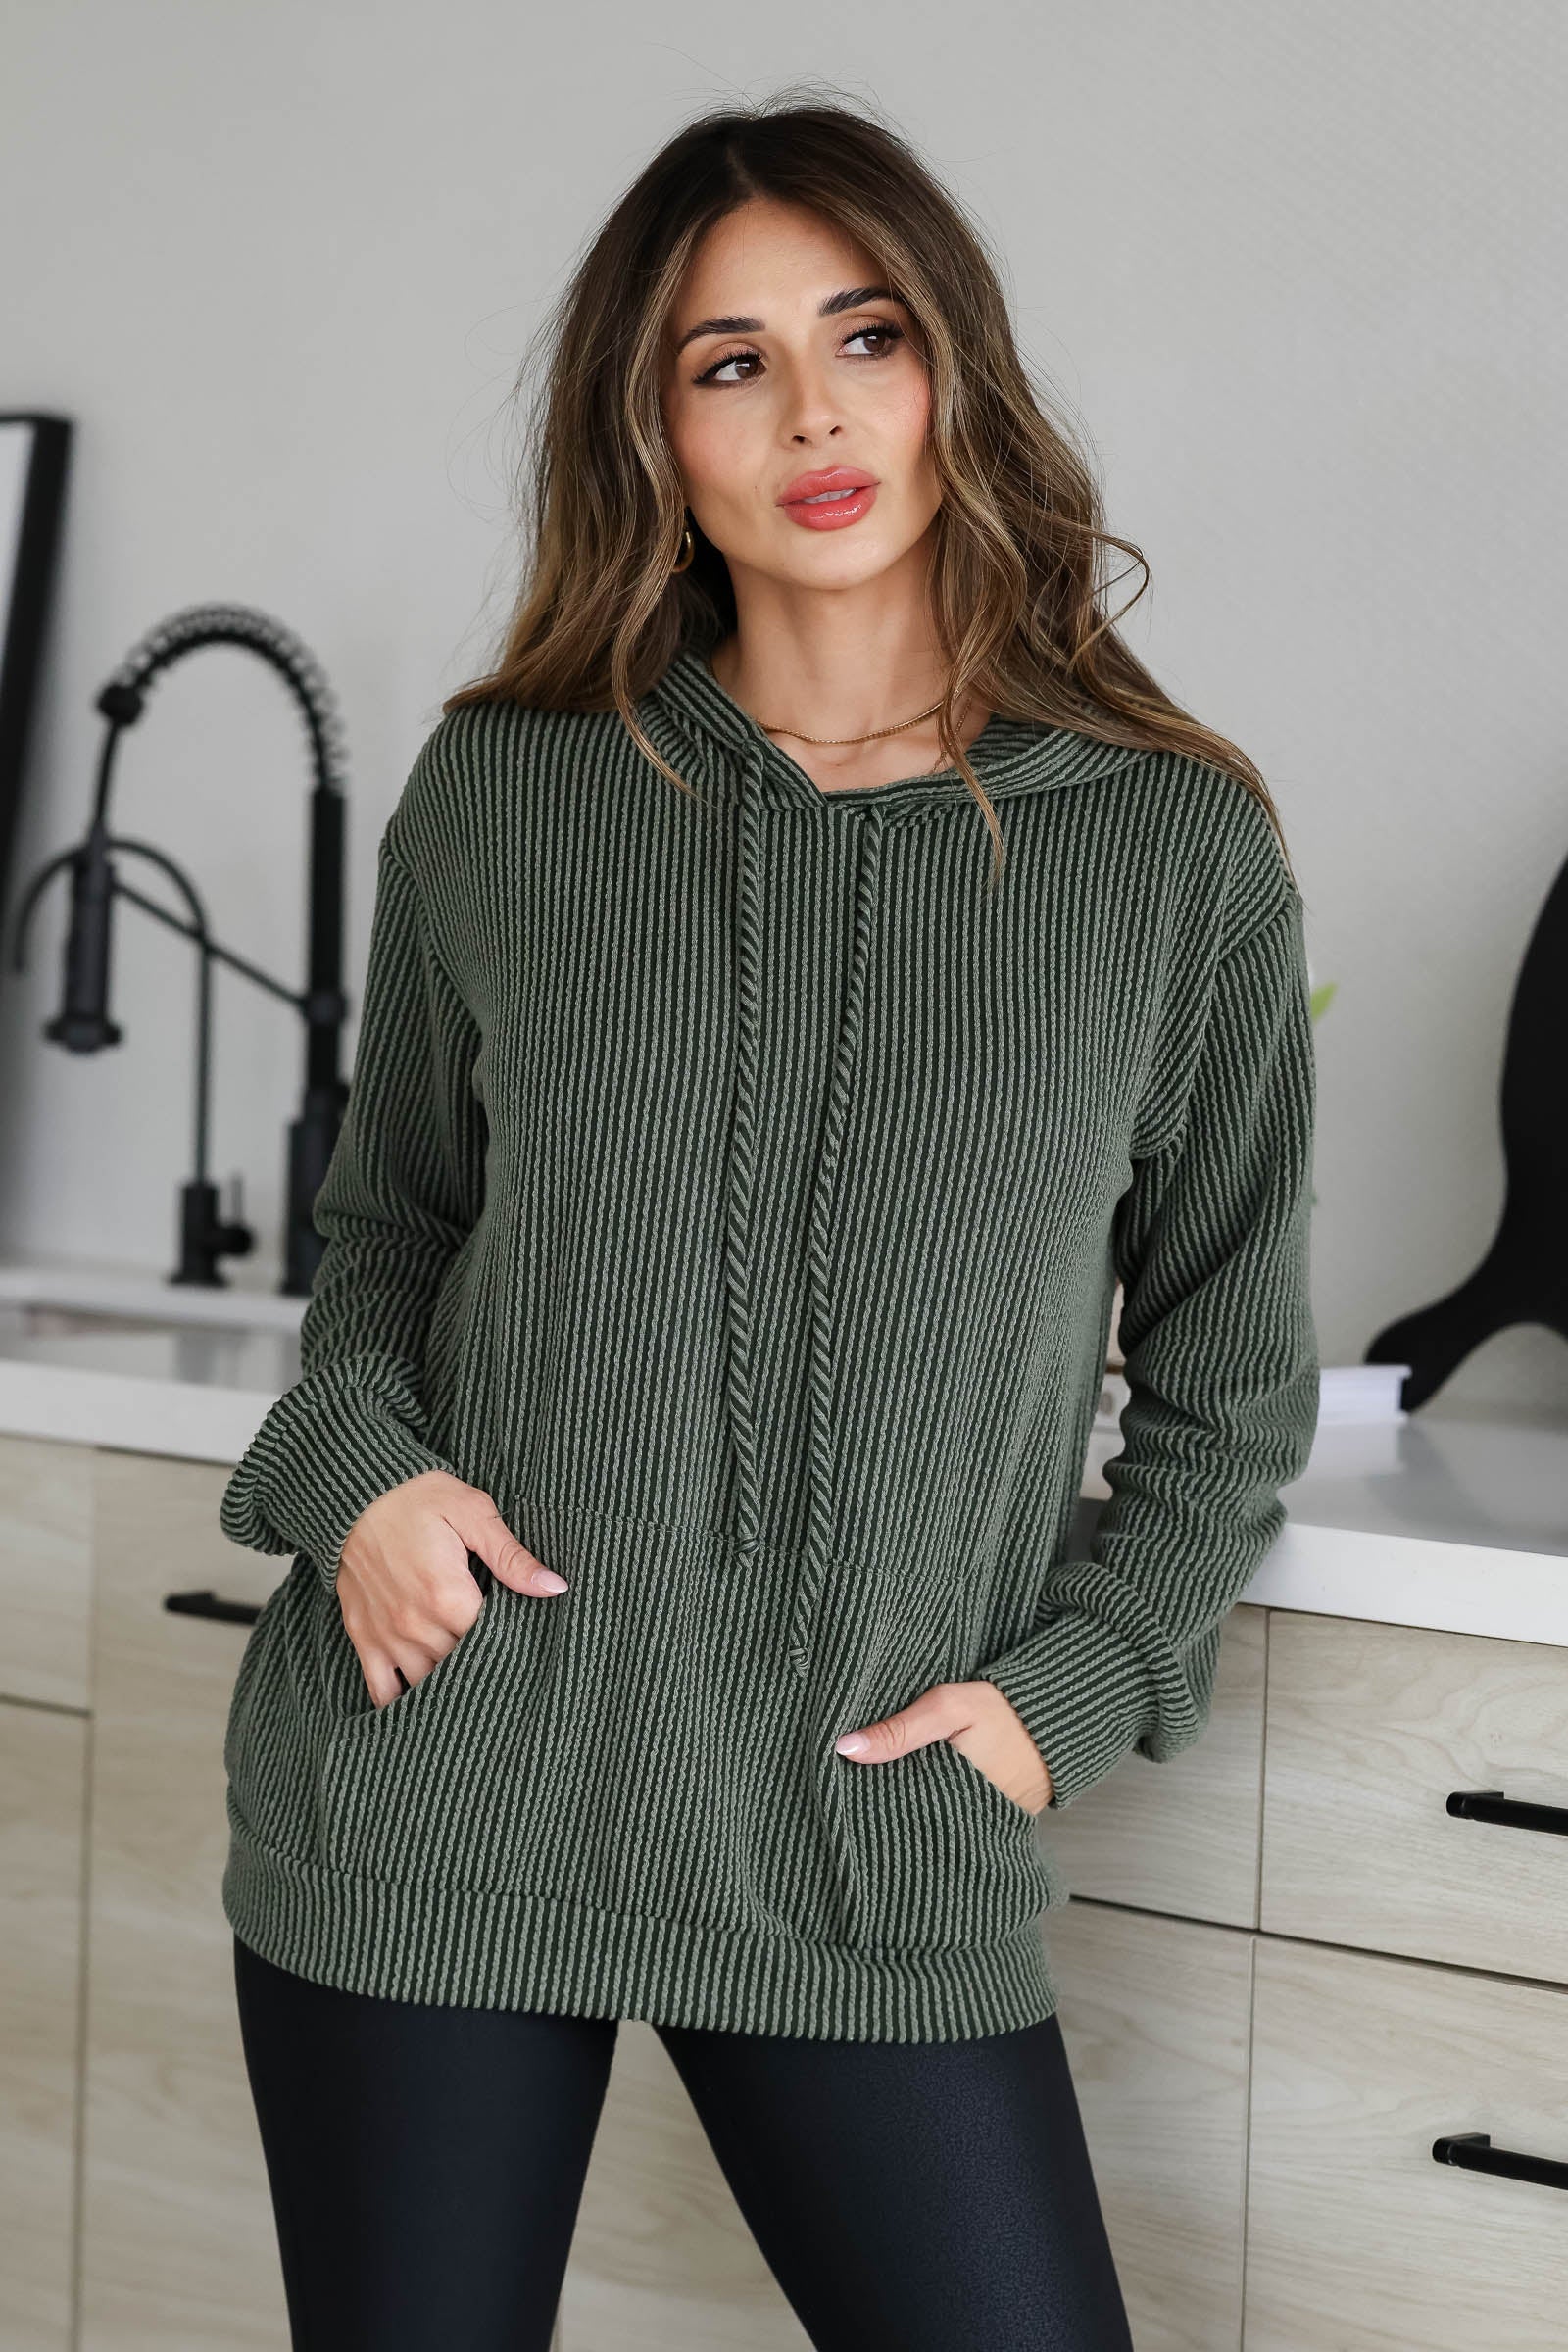 Too Good Ribbed Hoodie - Olive, Closet Candy, 1